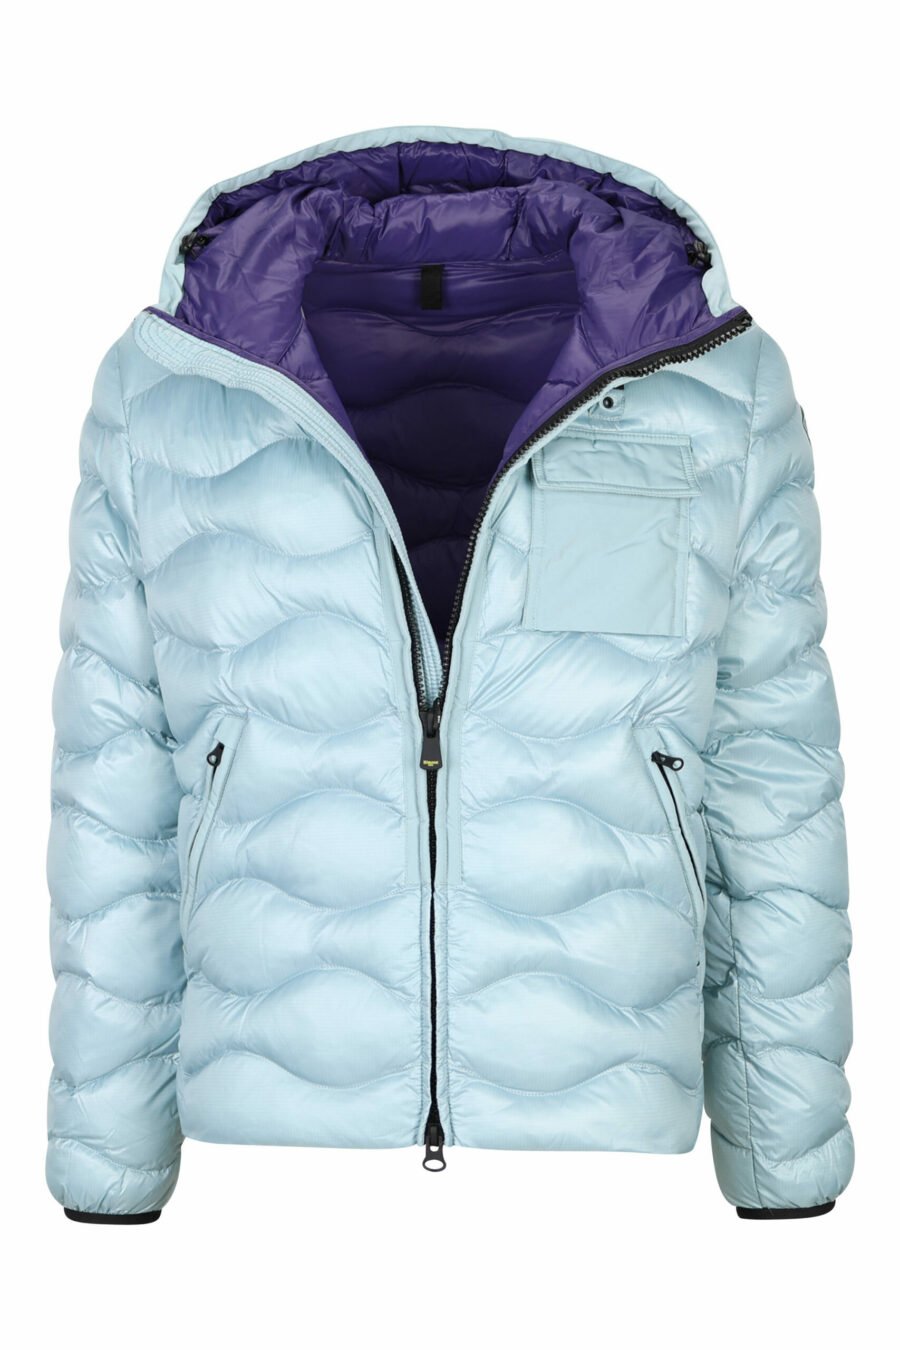 Light blue hooded jacket with wavy lines and violet lining - 8058610697198 1 scaled